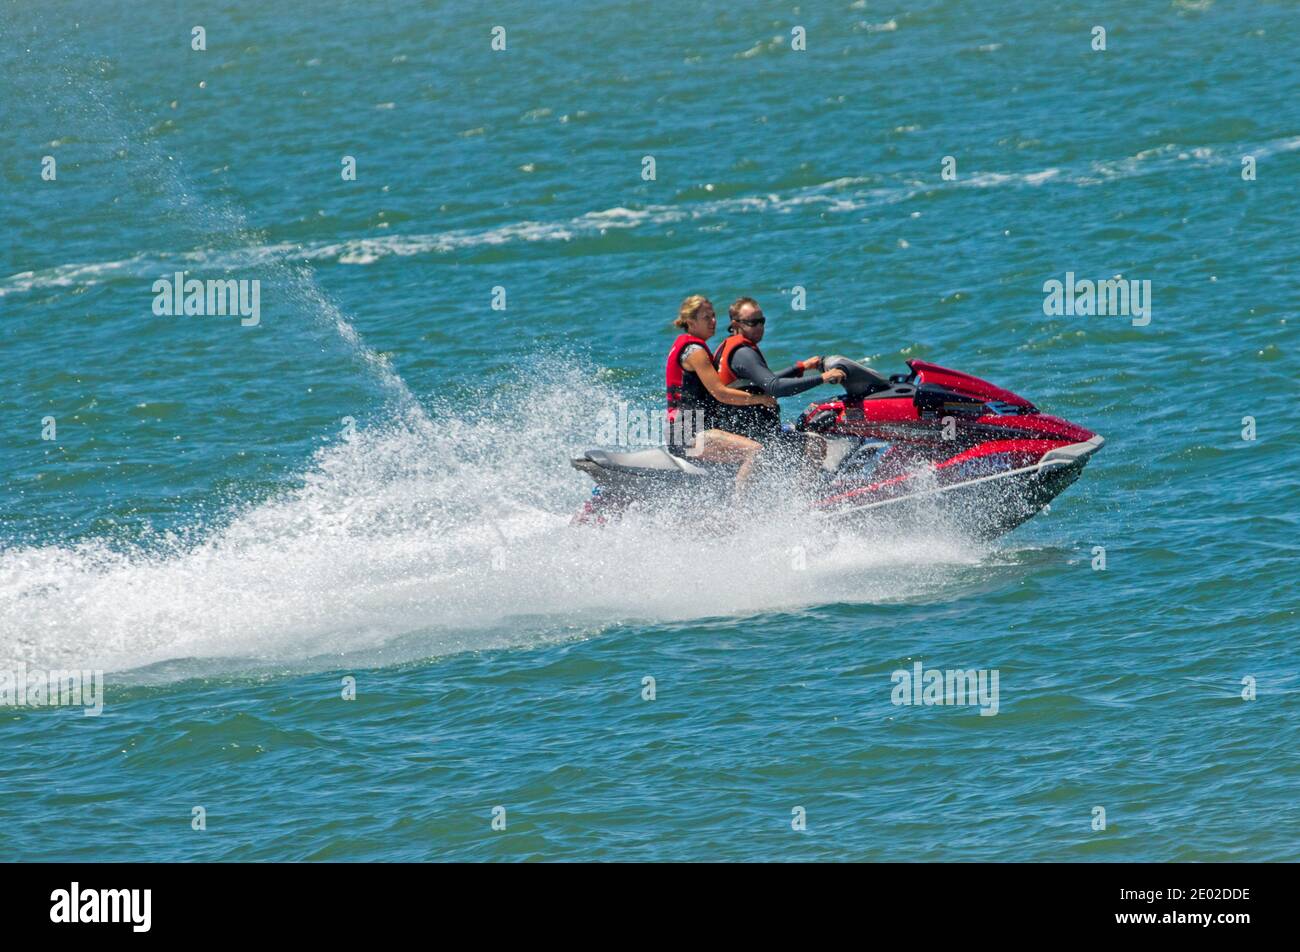 Two people riding bright red jet ski on blue water of Pacific Ocean with water spraying into air, in Queensland Australia Stock Photo